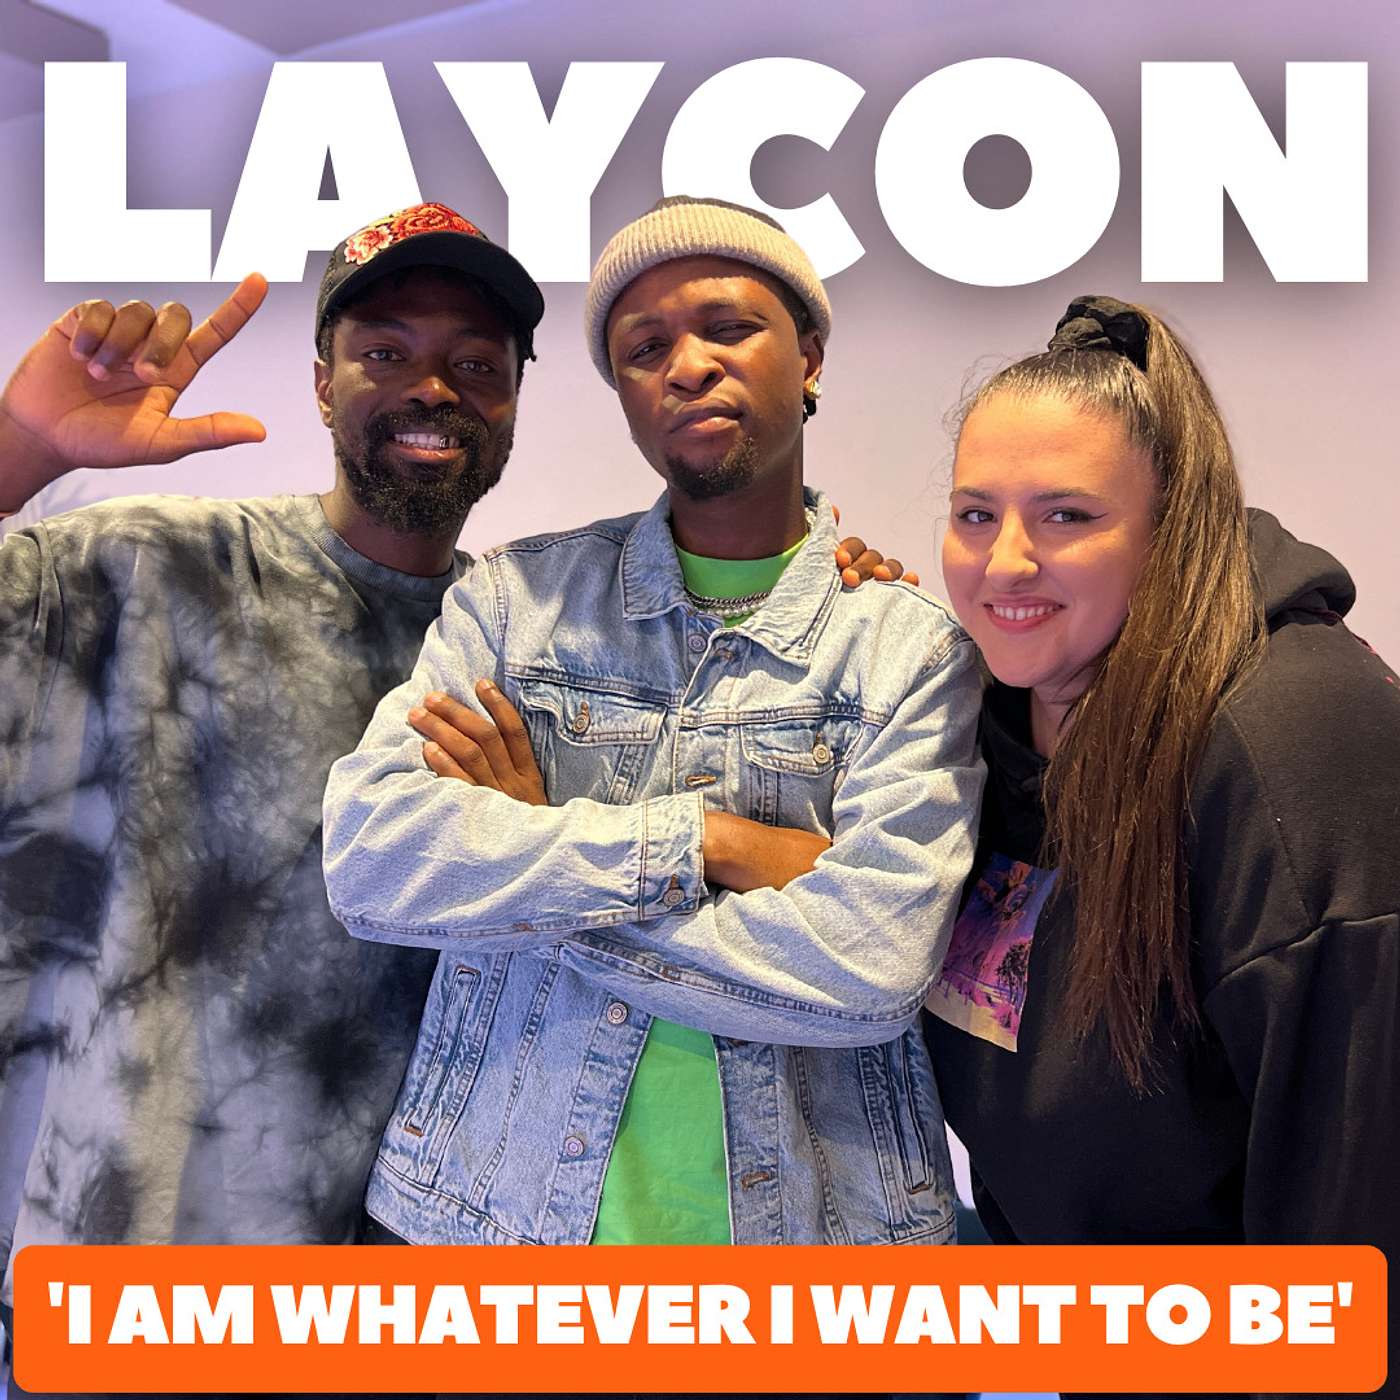 I Am Whatever I Want To Be ft LAYCON